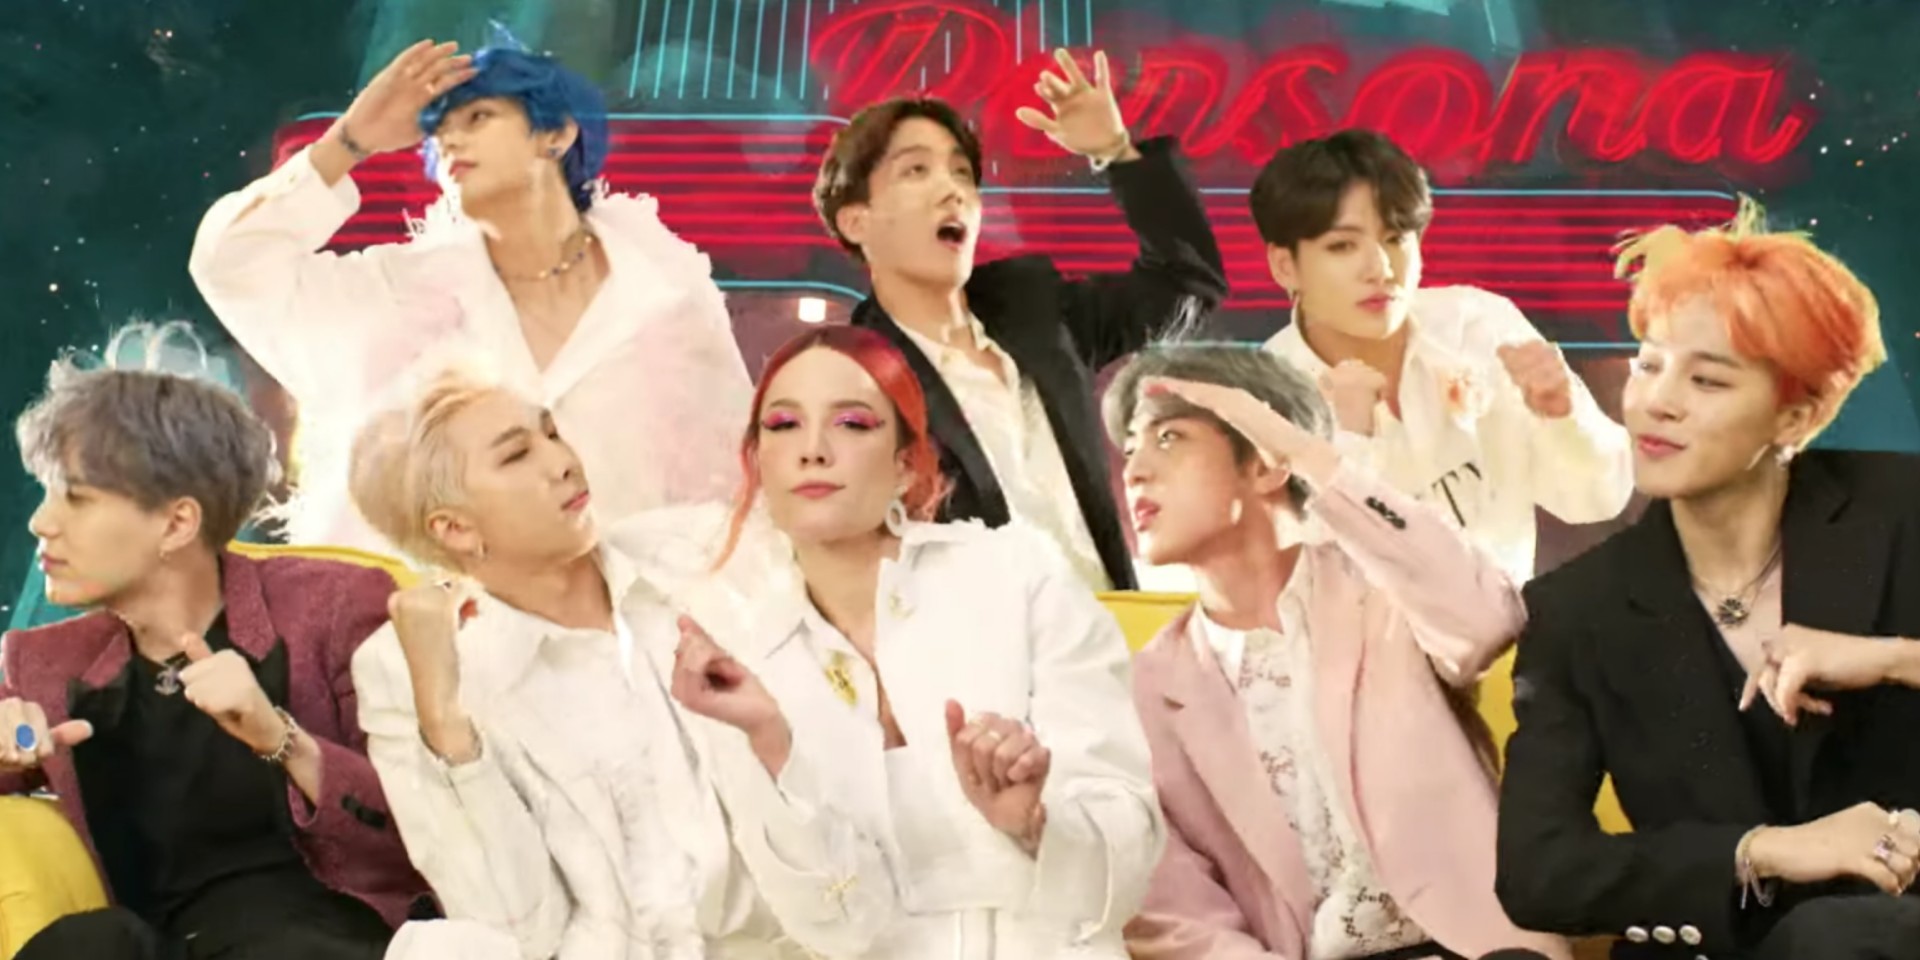 BTS releases new version of 'Boy With Luv' music video, 'ARMY with Luv' – watch